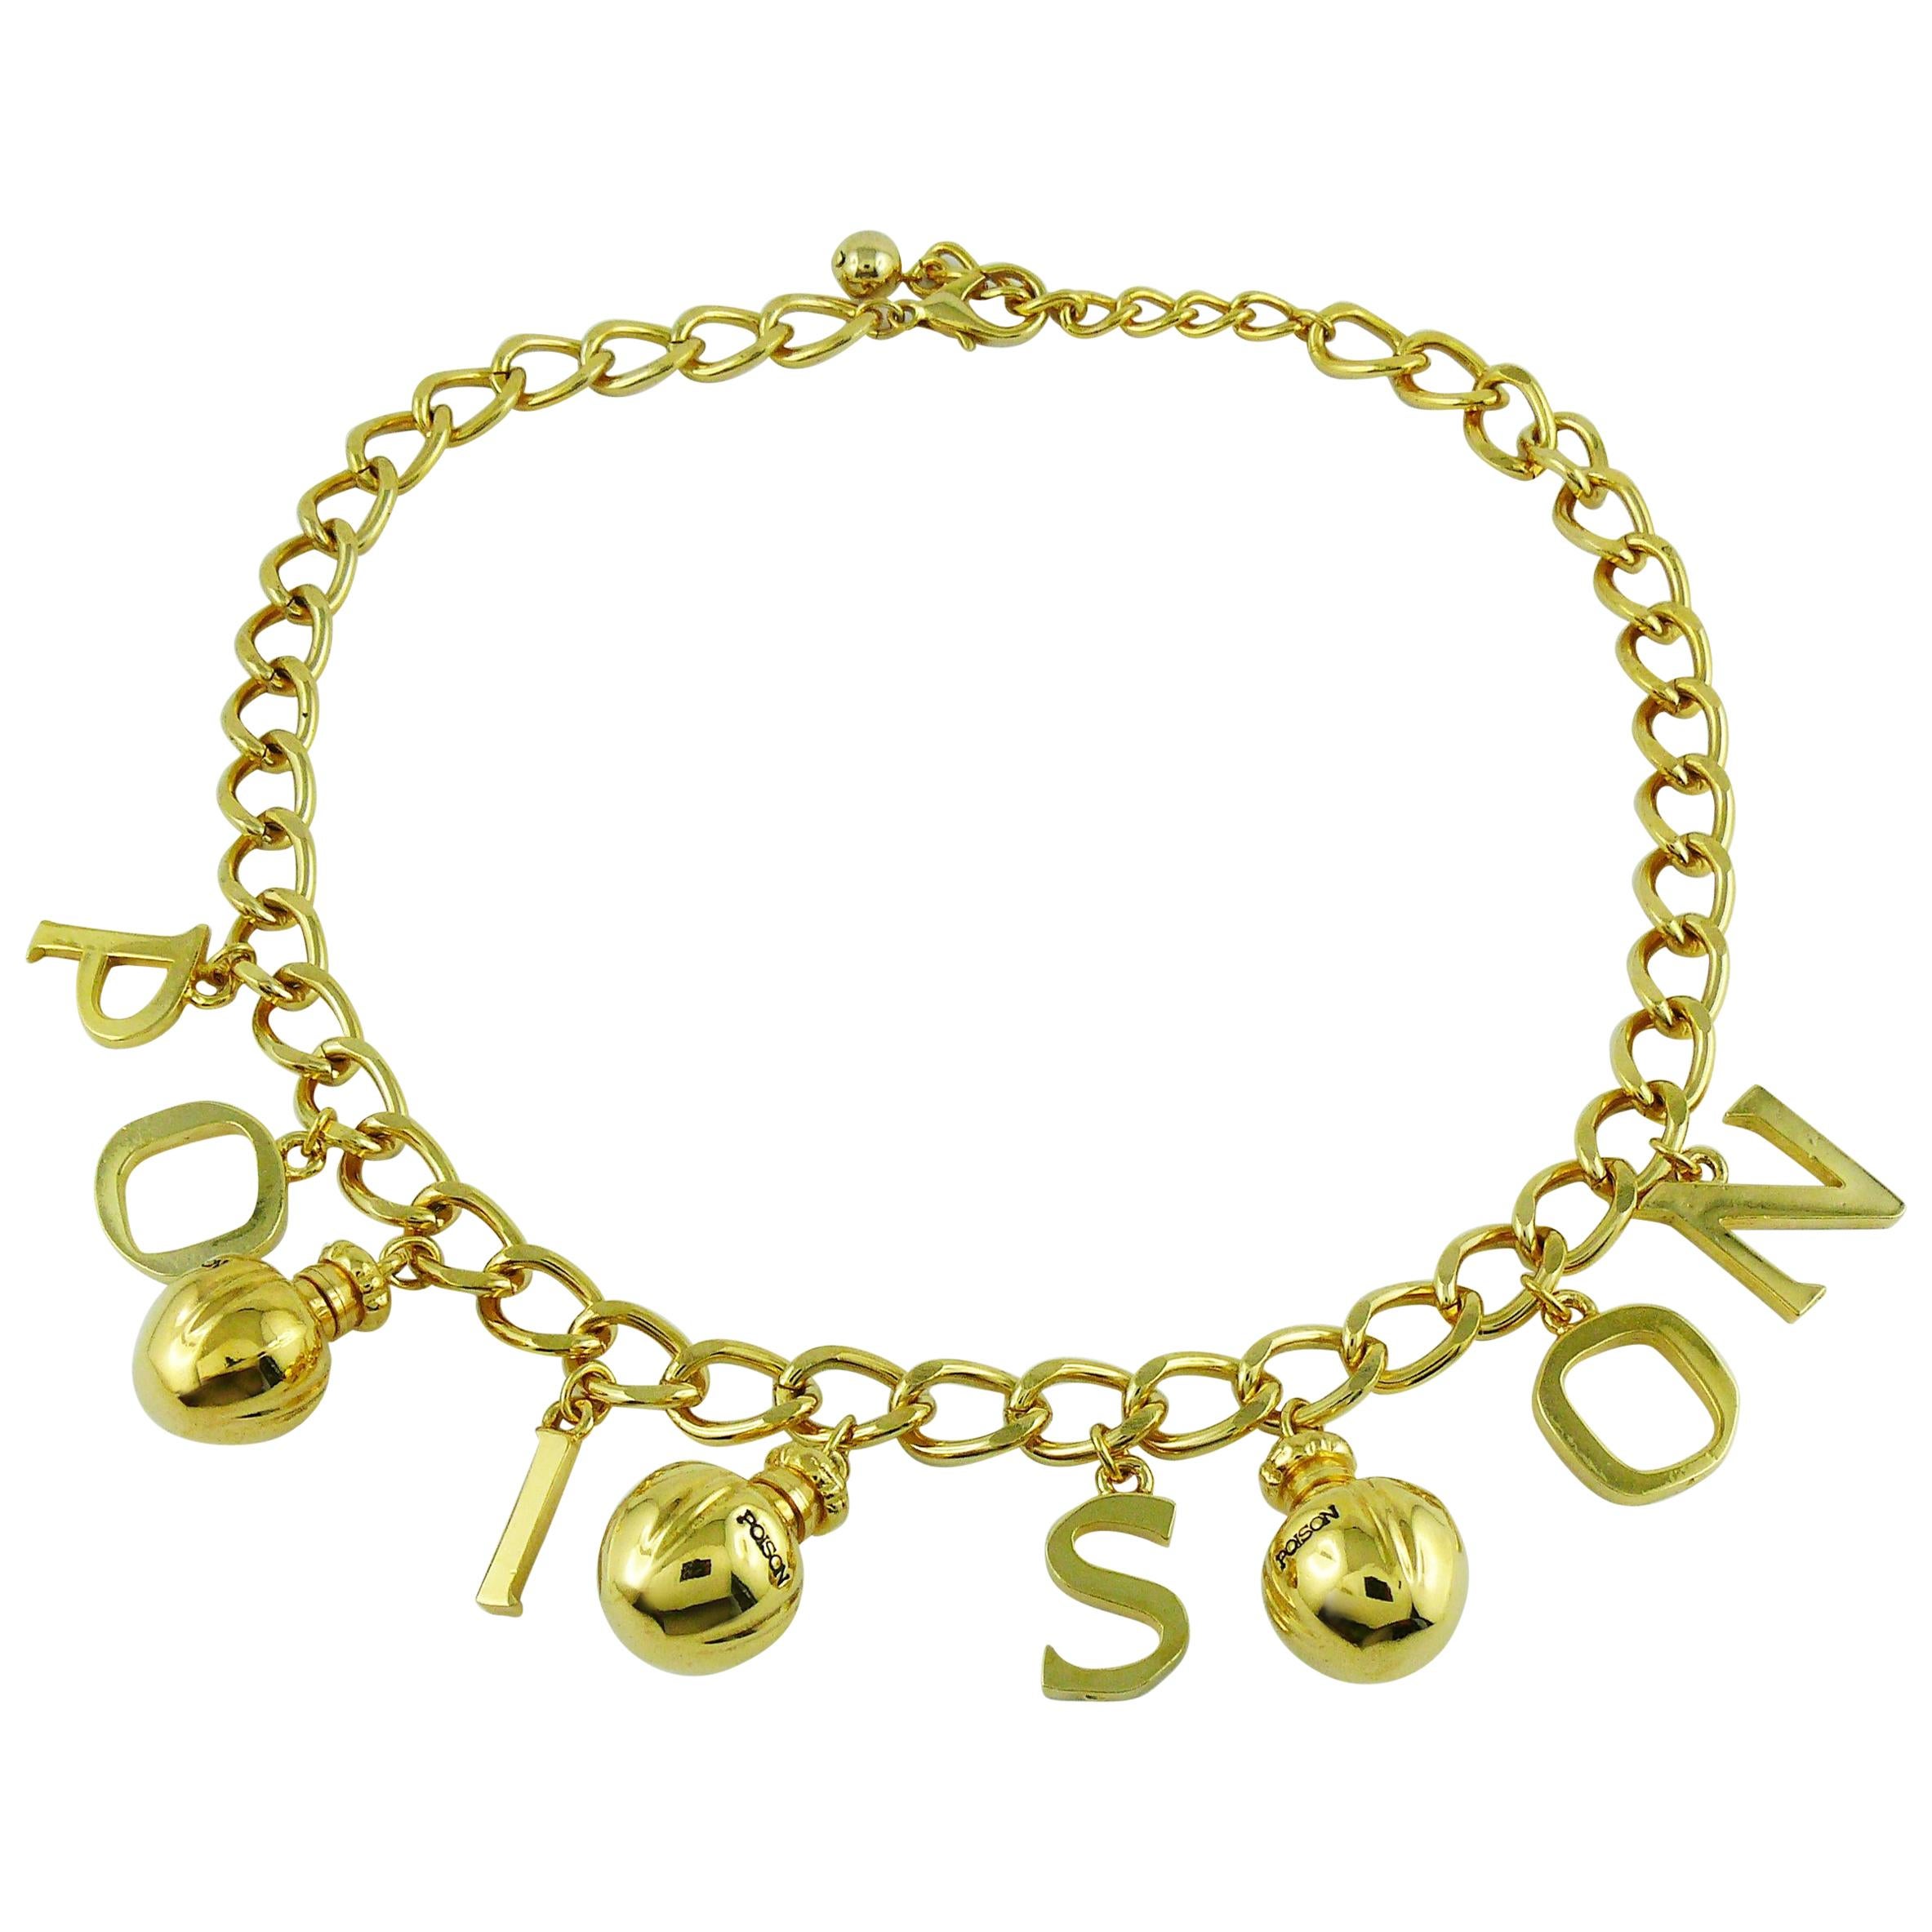 Christian Dior Vintage Gold Toned Poison Flacons Necklace